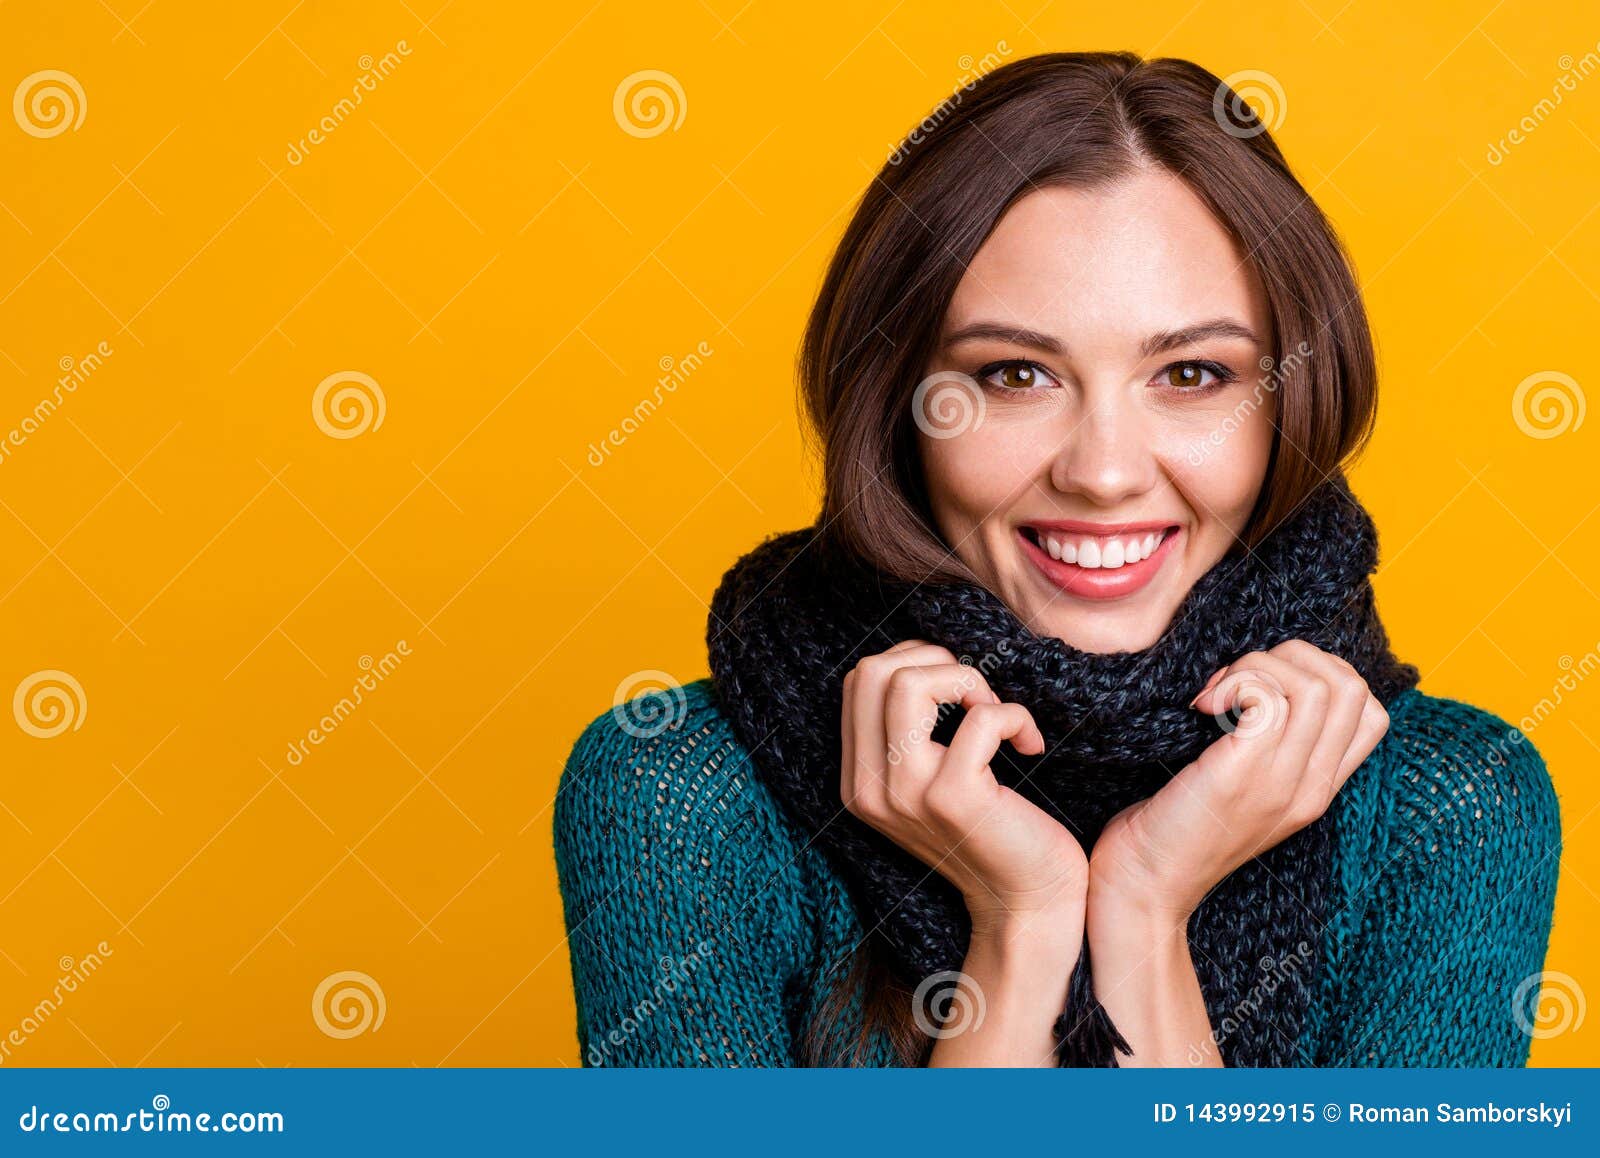 Close Up Photo Beautiful Amazing Her She Lady Hold Hands Arms Soft Warm Scarf Around Neck